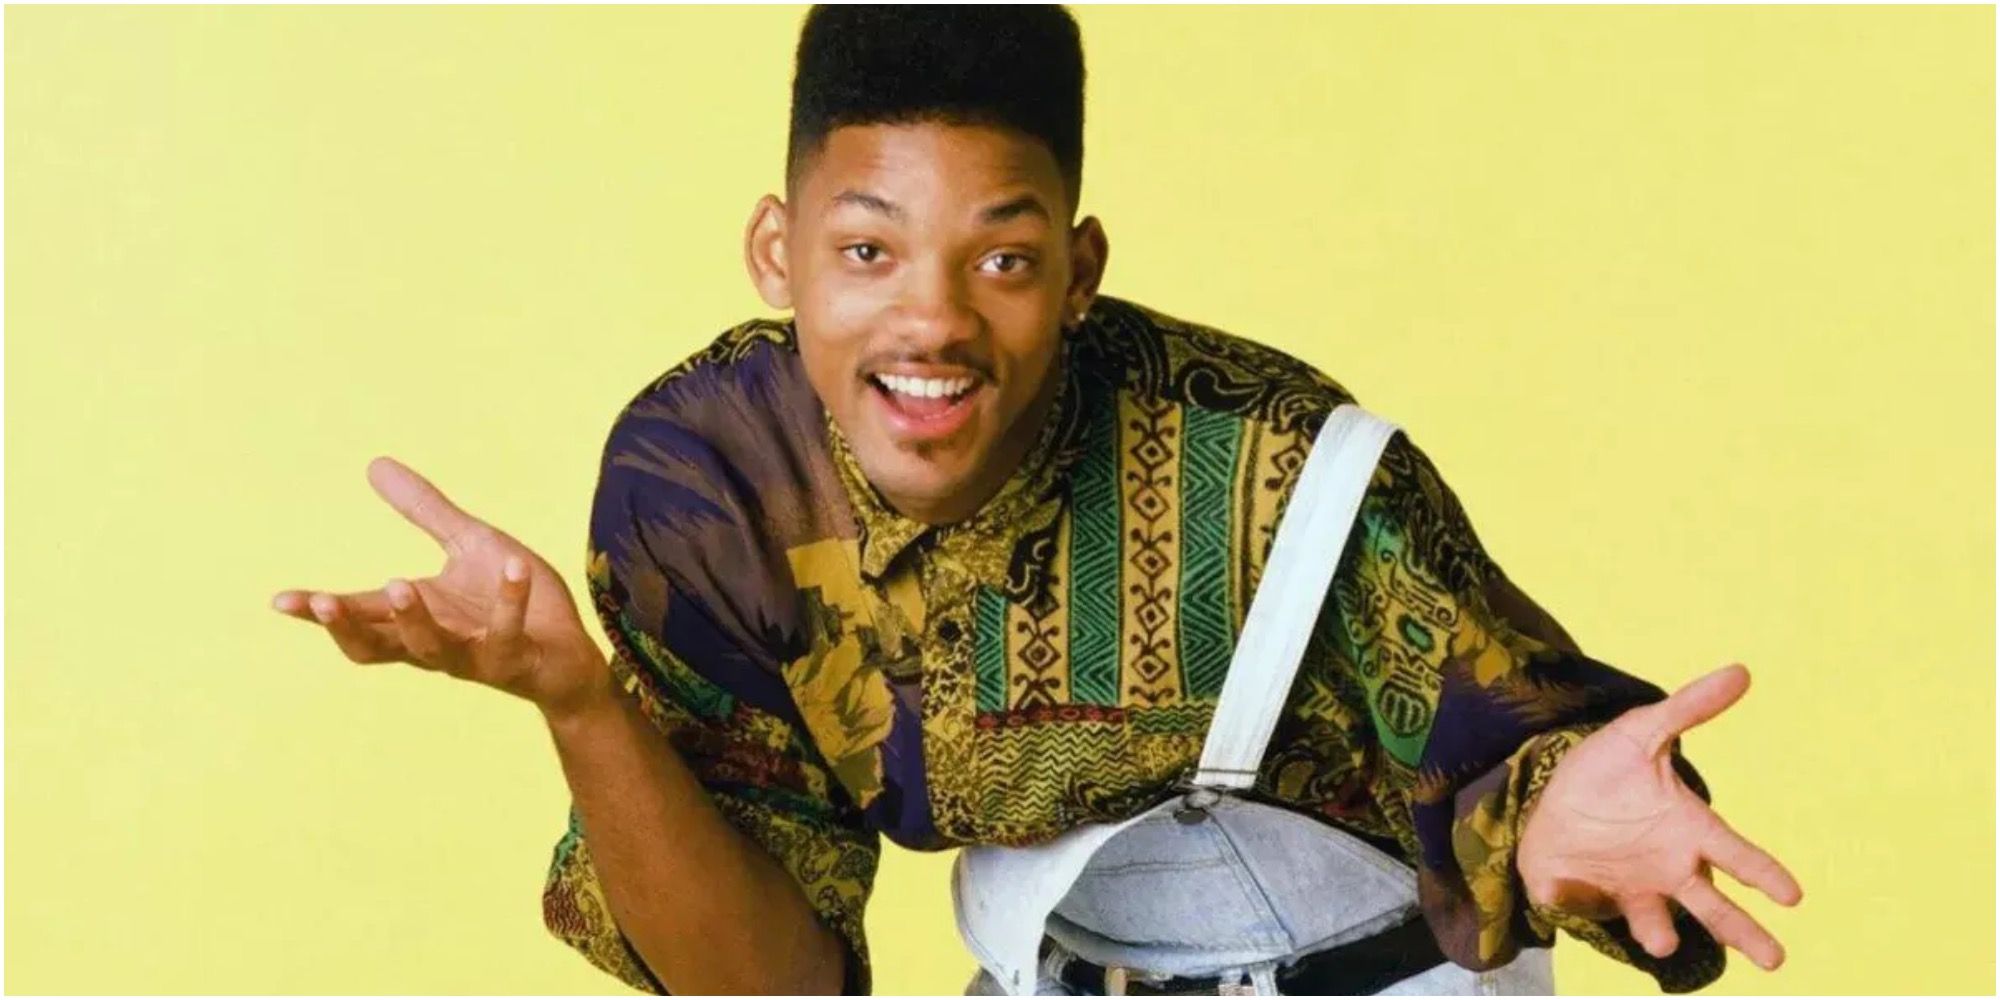 Picture Of Will Smith As The Fresh Prince Of Bel Air